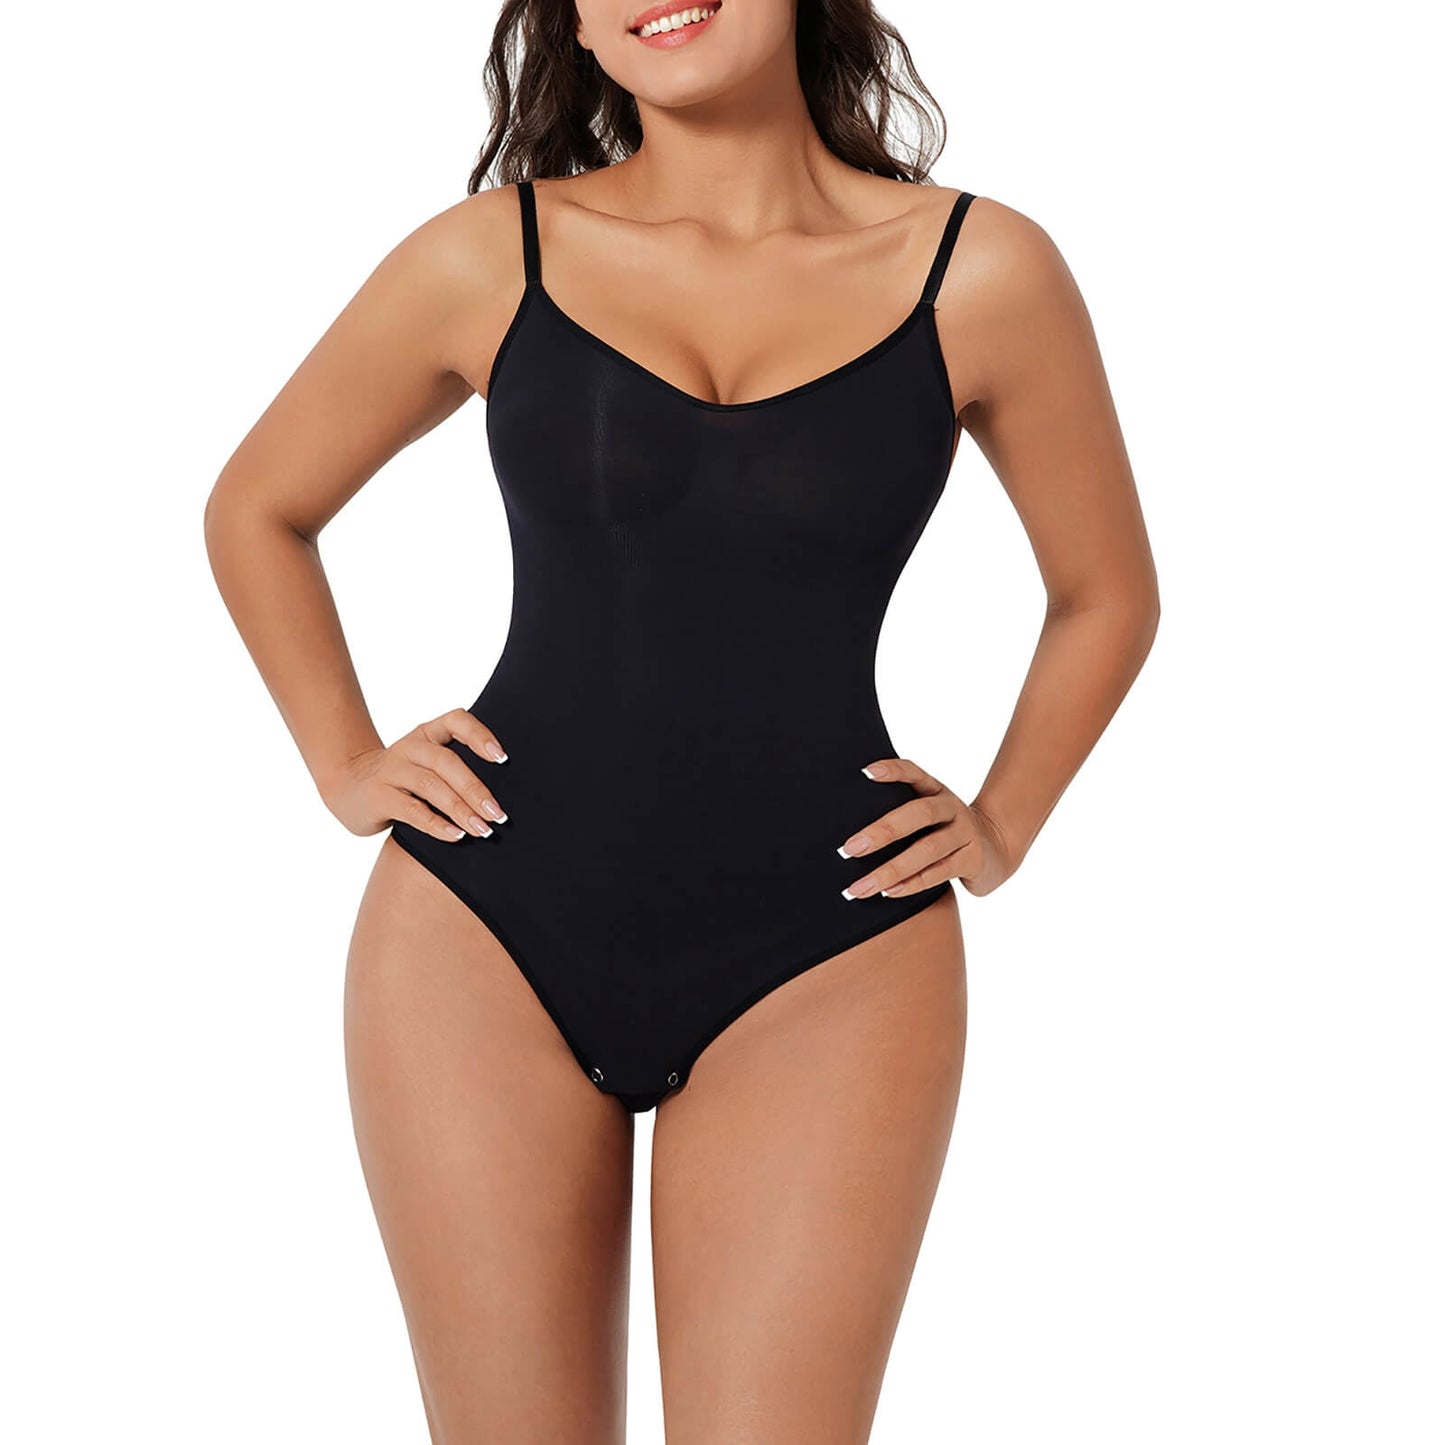 The Ultimate Snatched Body Shaper – Epicc8